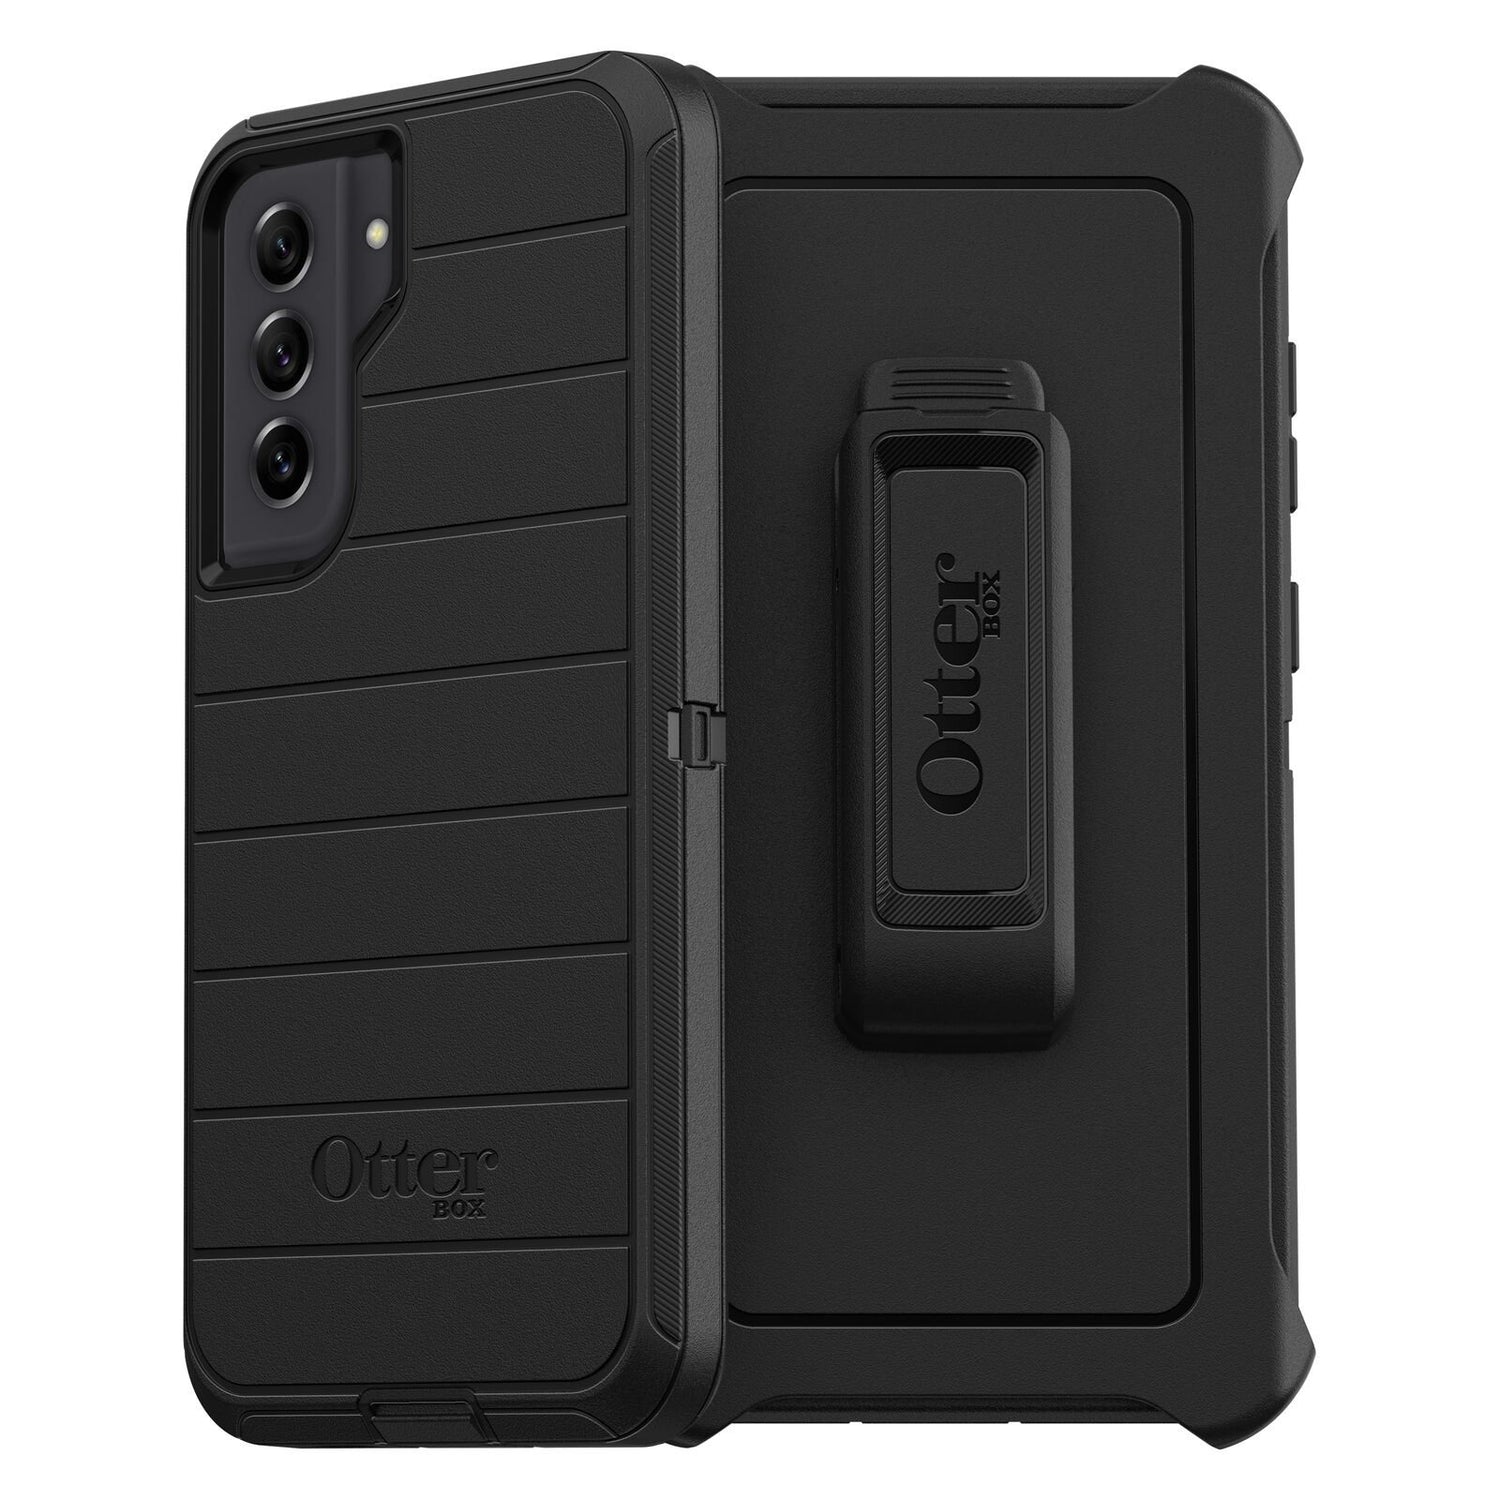 OtterBox DEFENDER SERIES SCREENLESS EDITION Case for Galaxy S21 FE 5G - Black (Certified Refurbished)